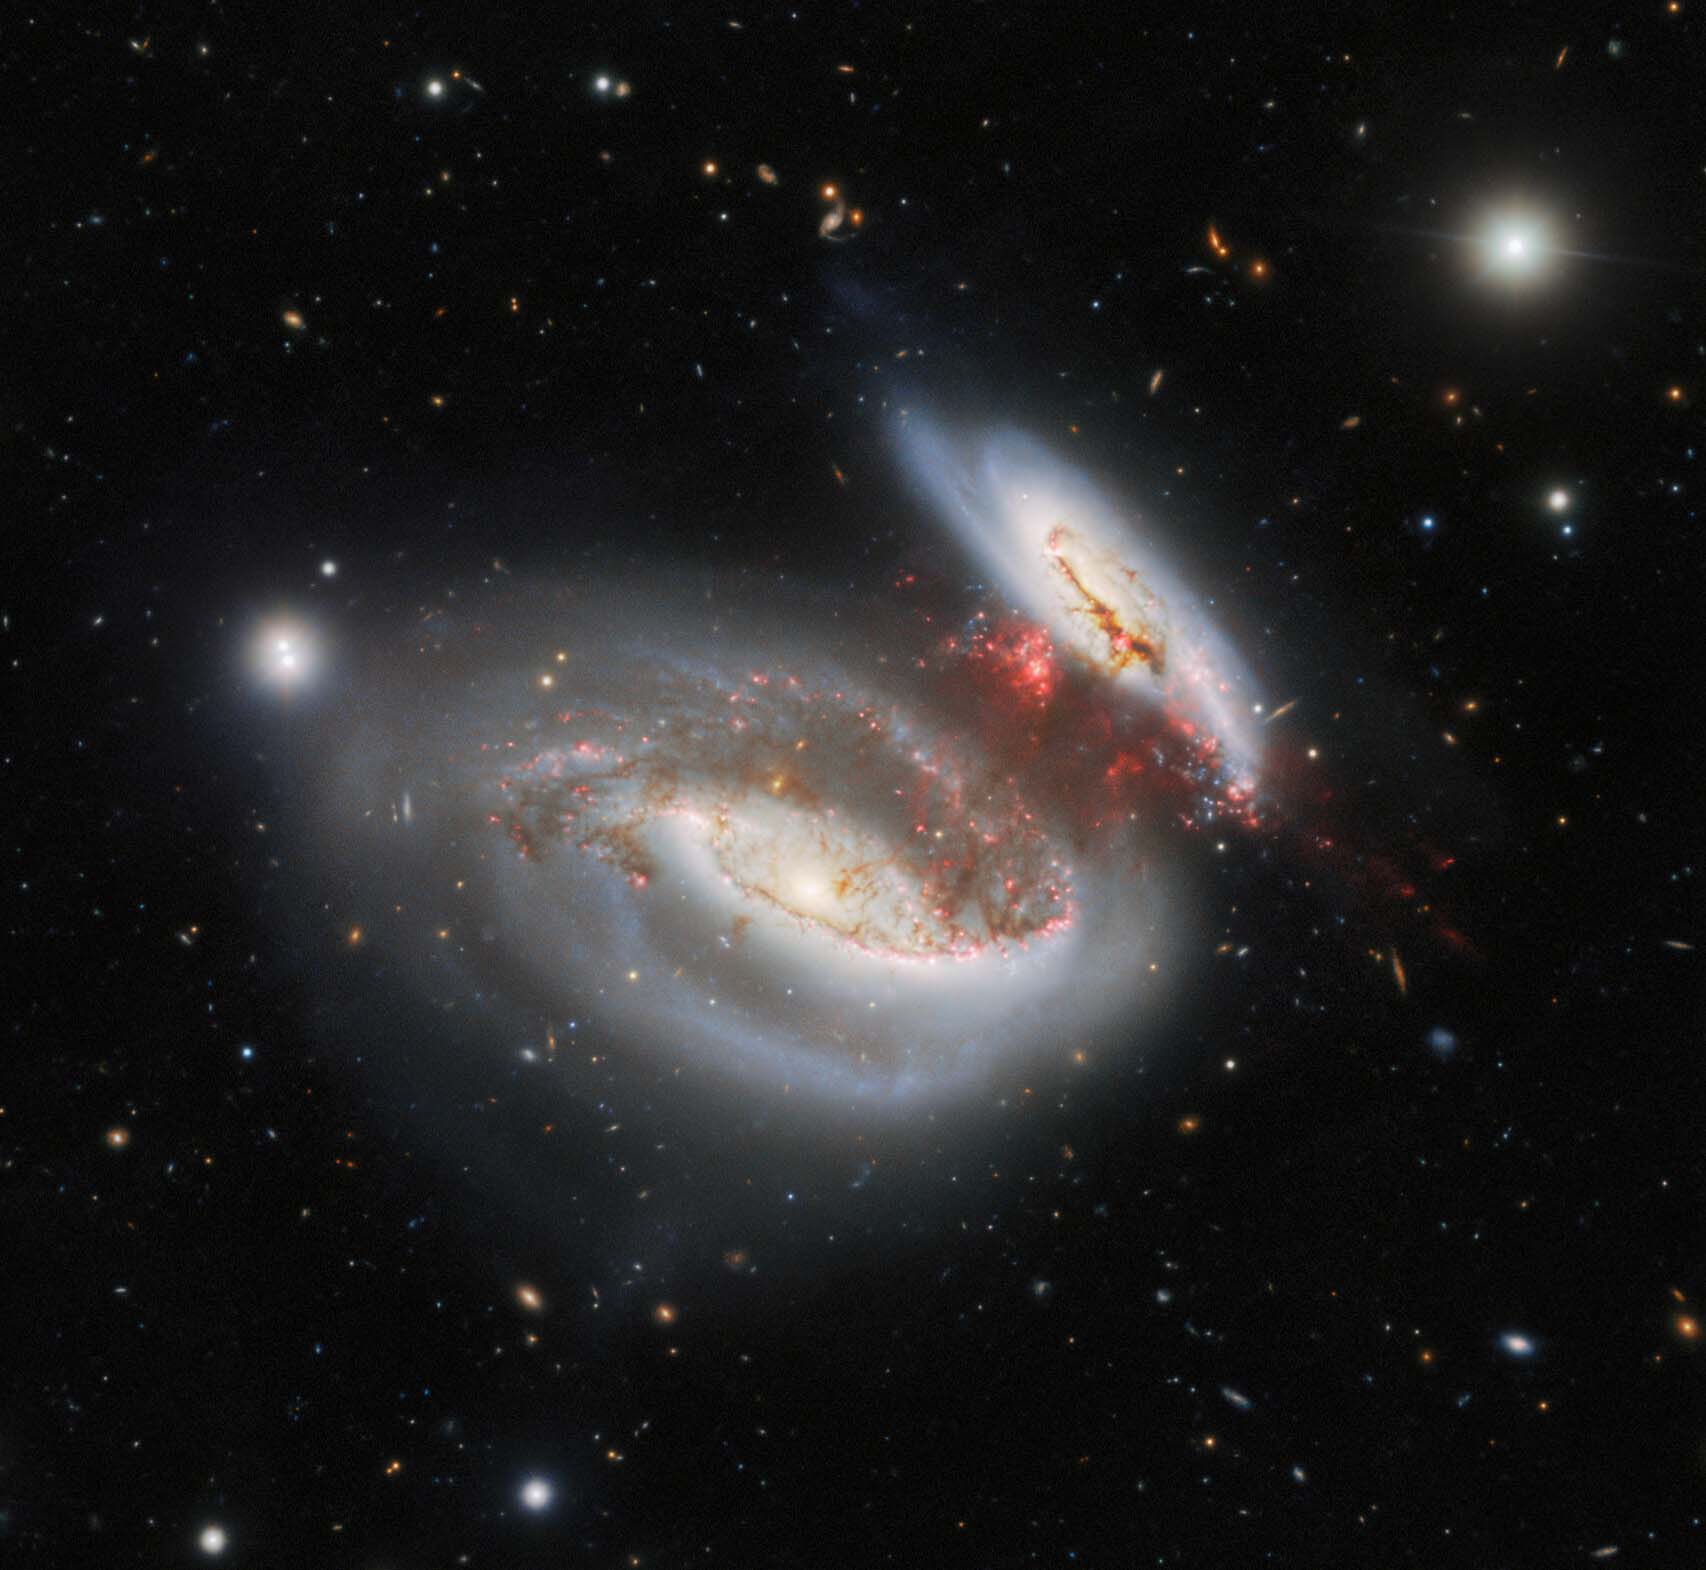 2 bright pinwheel galaxies move close together with bright red spots between them on a black background speckled with distant galaxies.